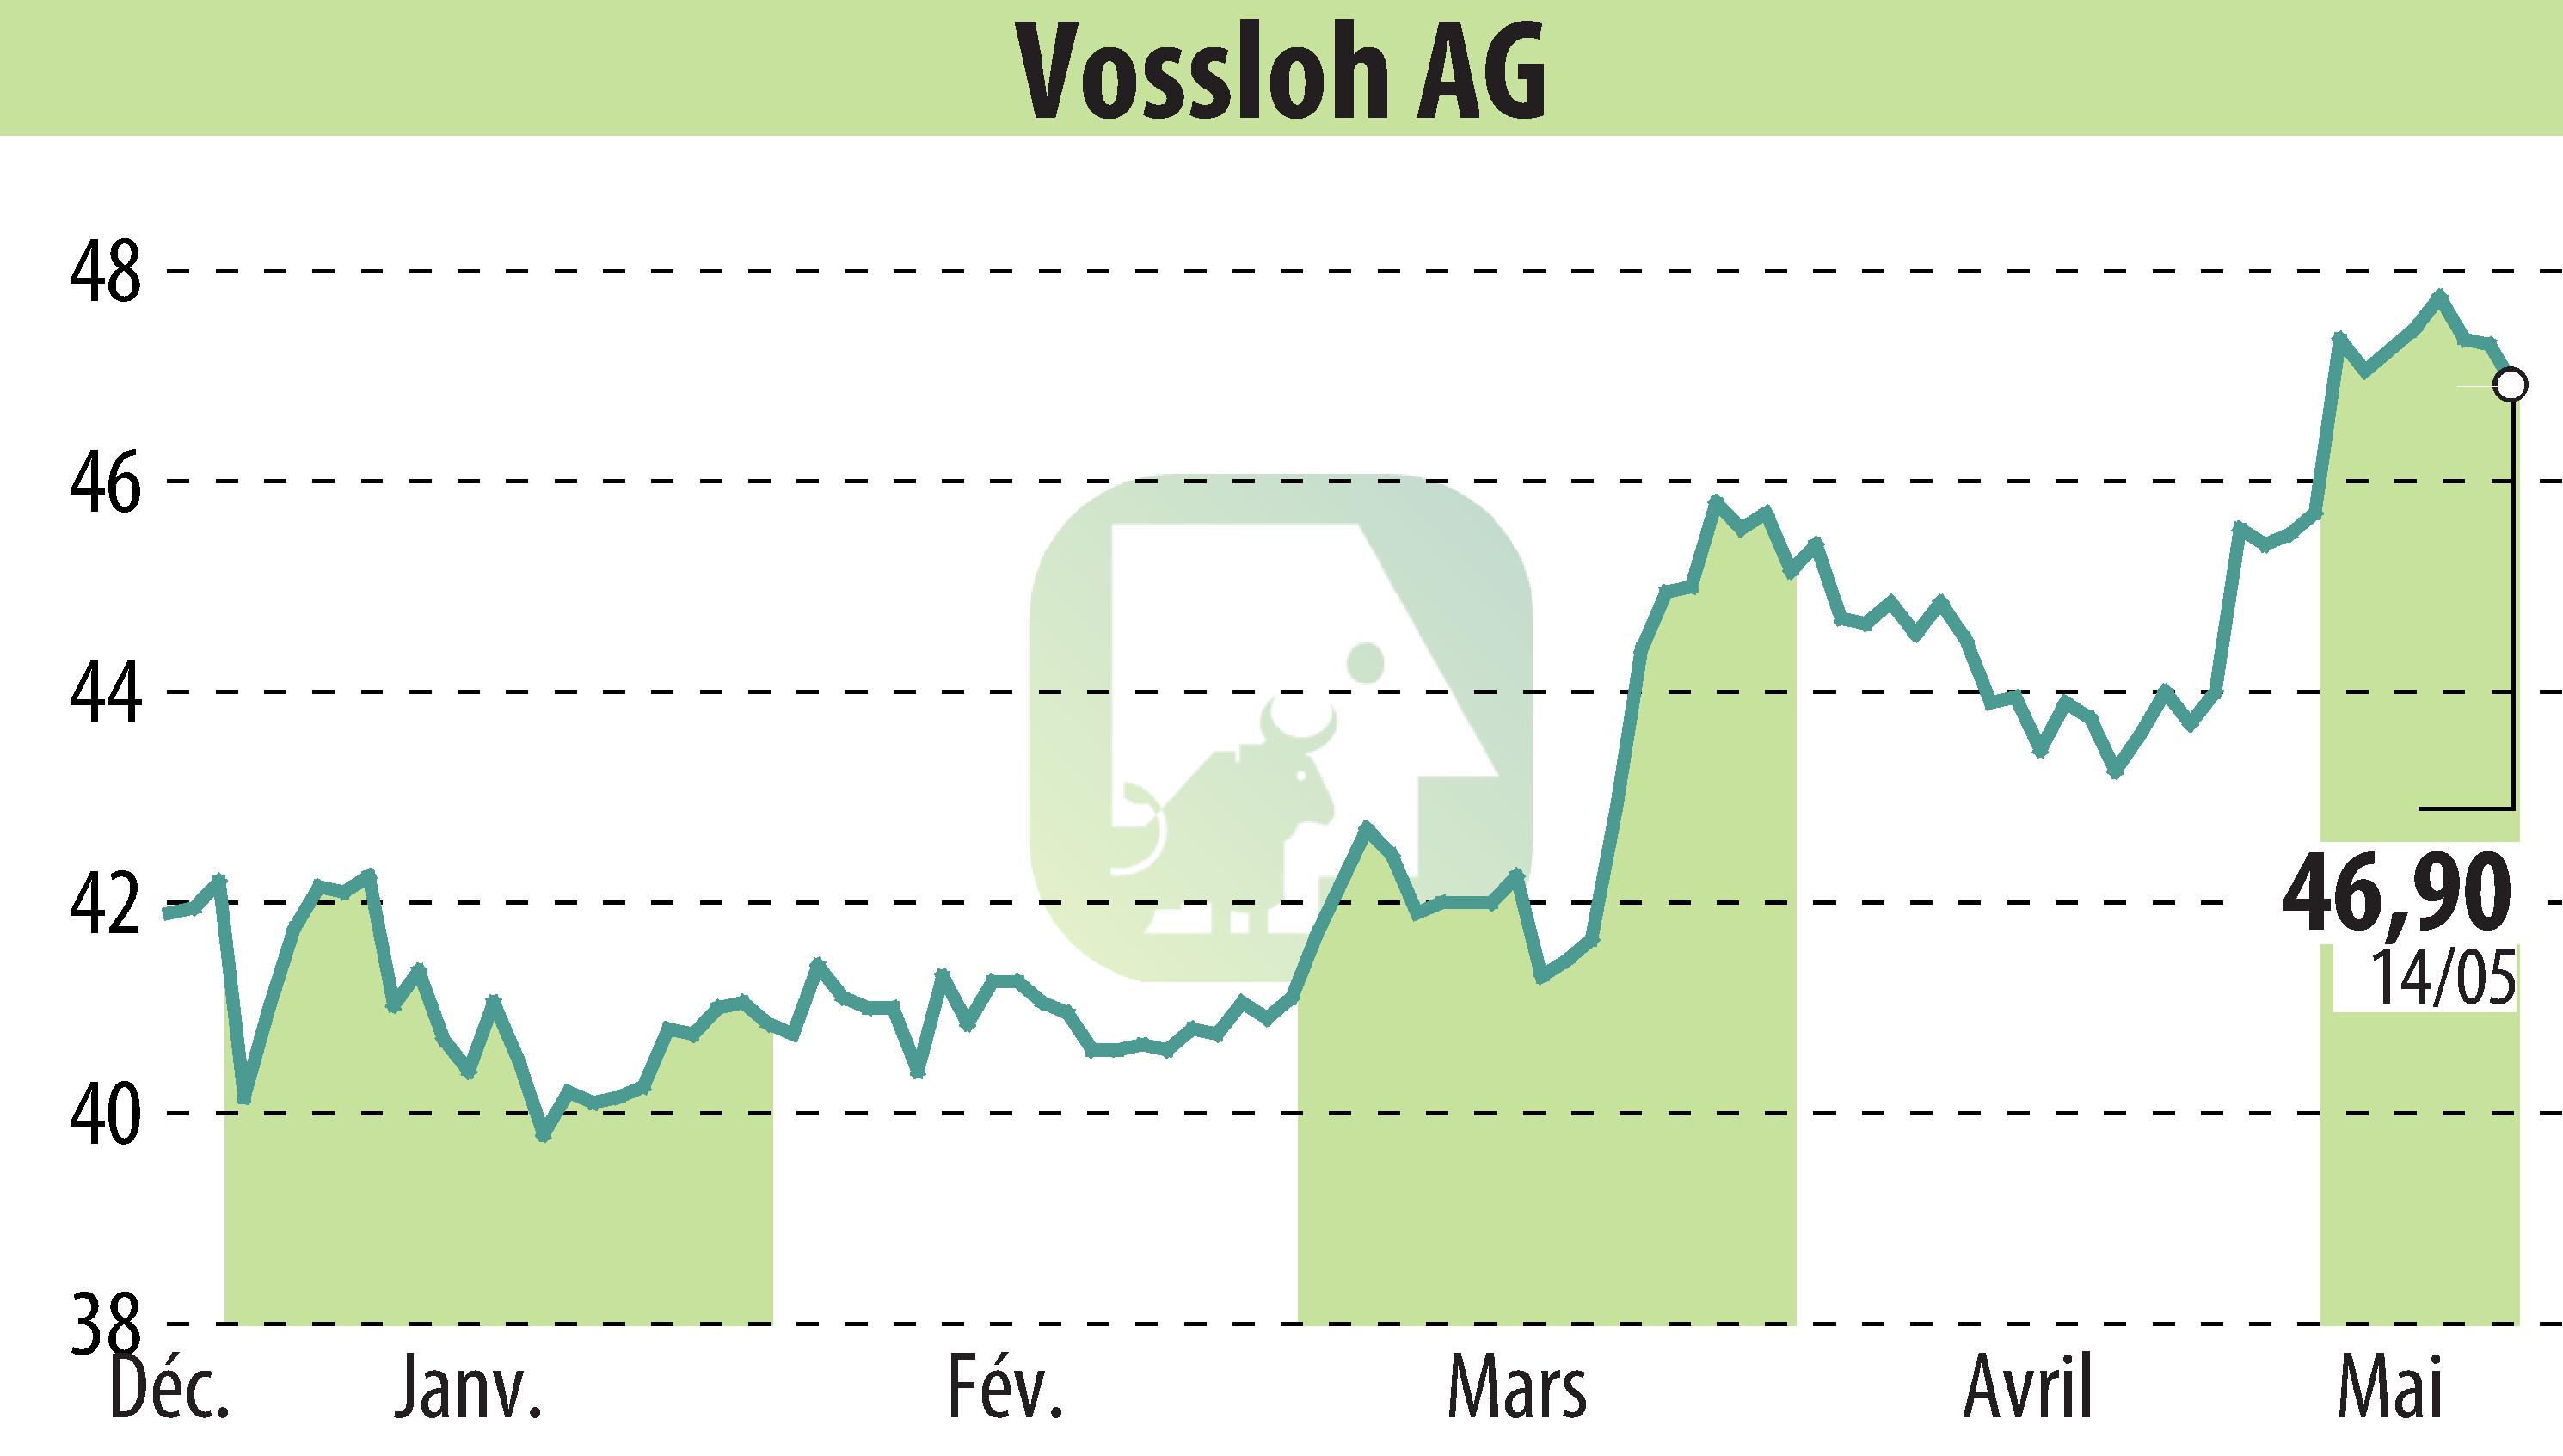 Stock price chart of Vossloh AG (EBR:VOS) showing fluctuations.